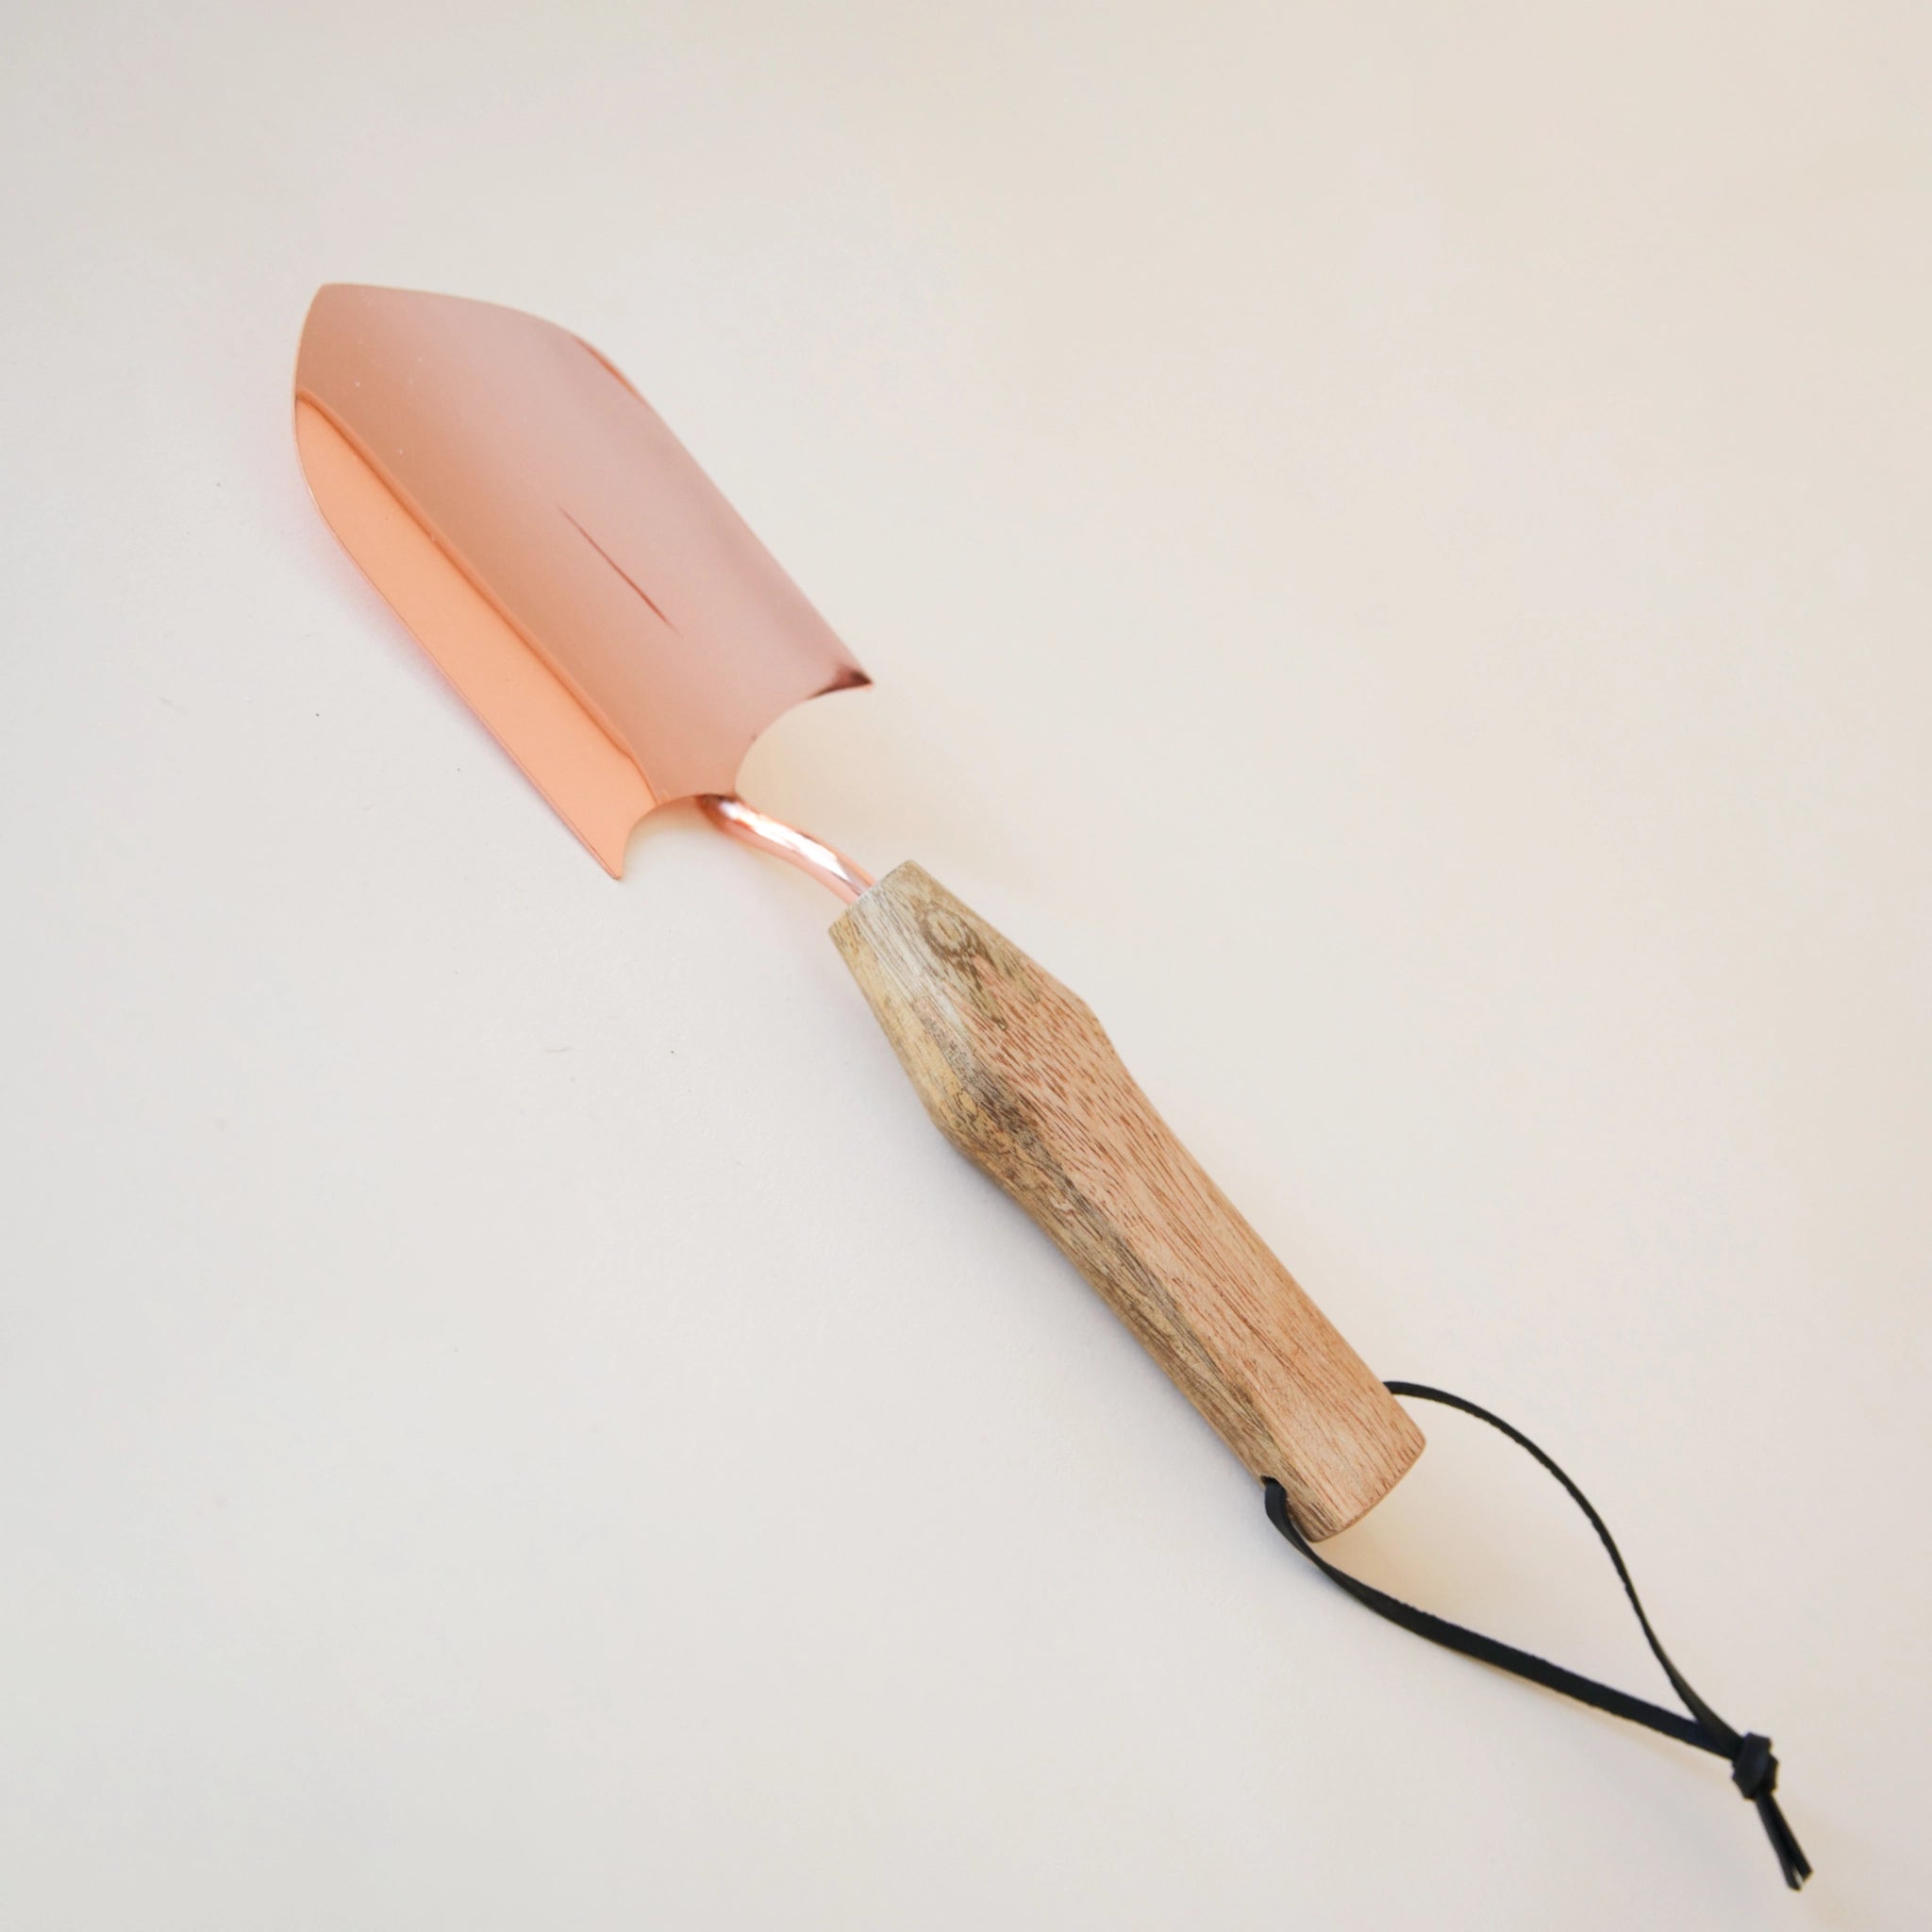 On a cream background is a set of gardening tools that have a rose gold metal, mango wood handles and black leather loops on the end. The set includes a hand shovel and a gardening fork.